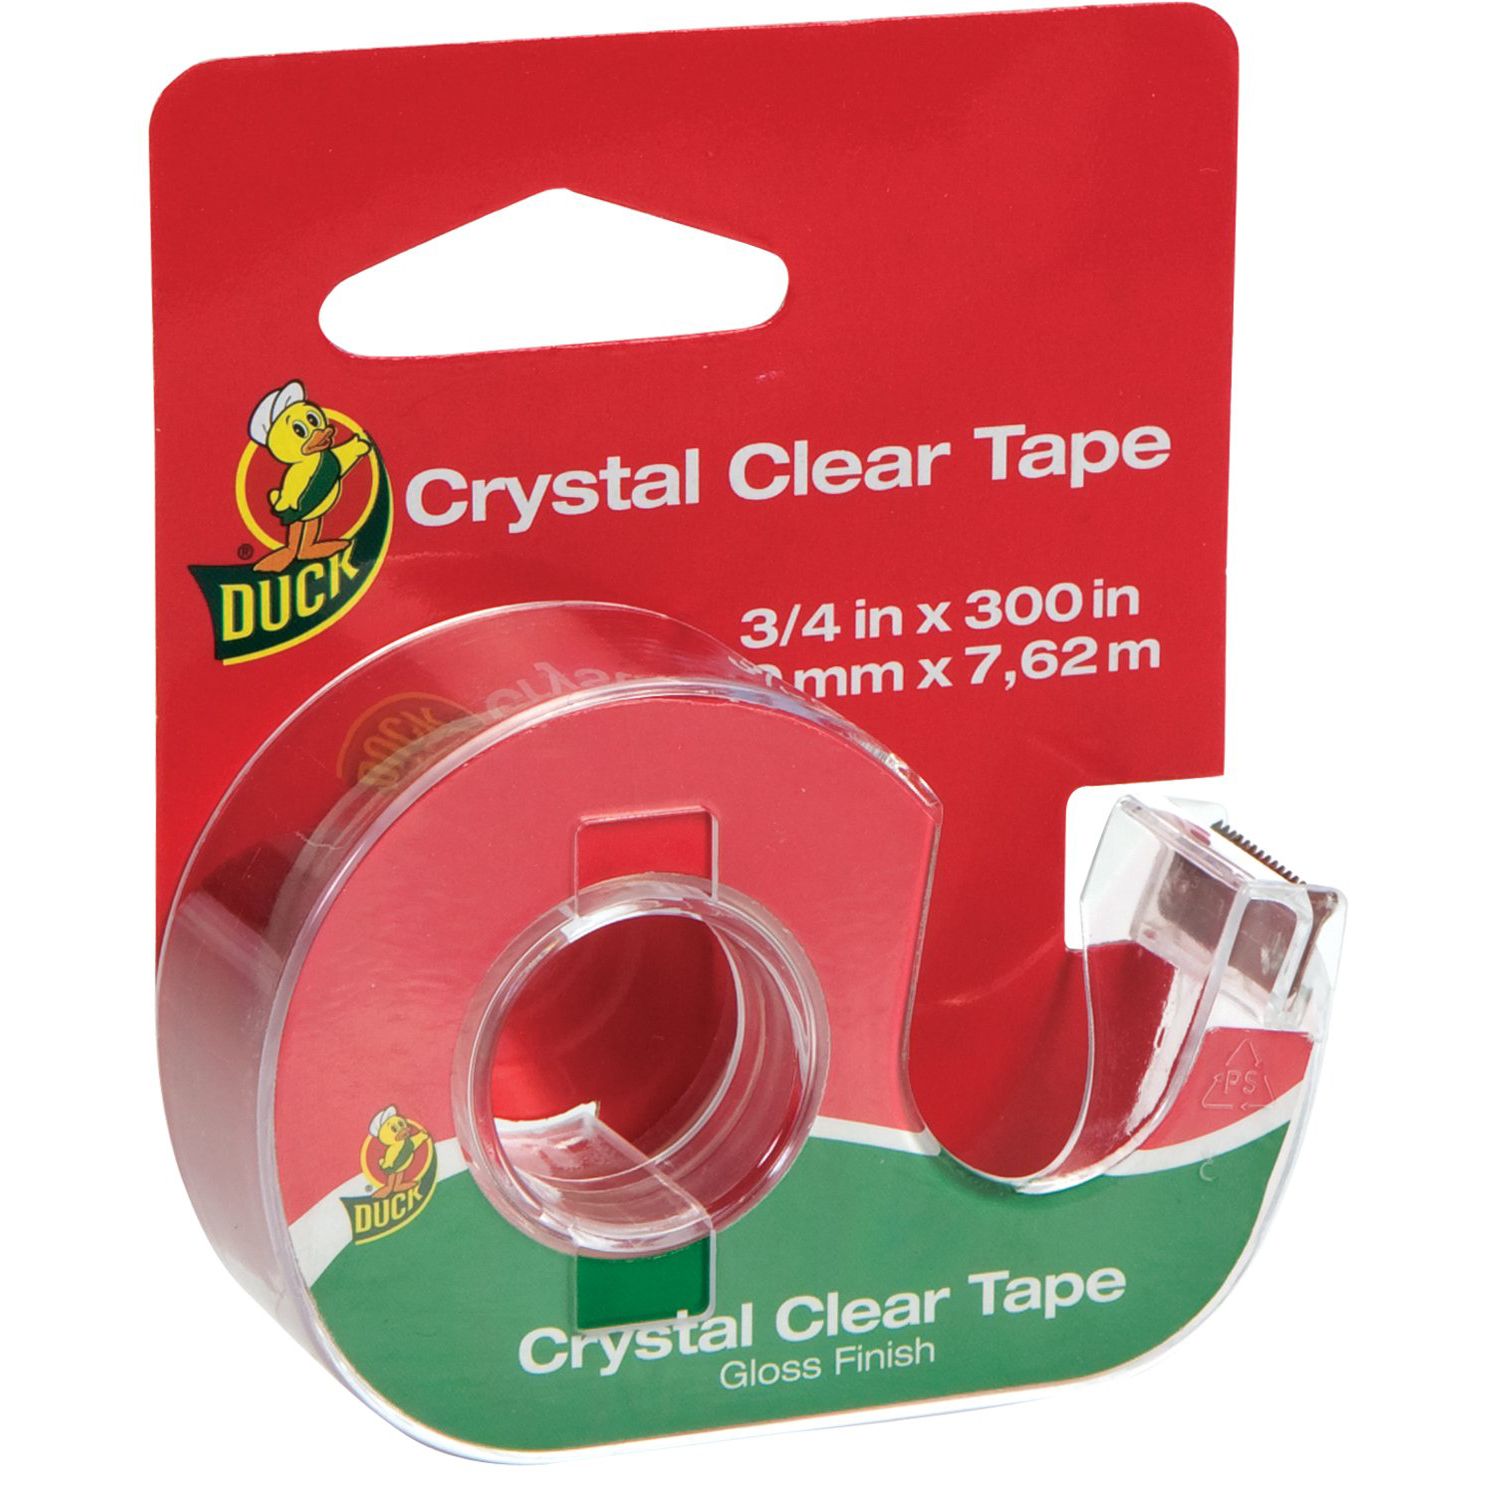 Duck Brand Crystal Clear Tape [Gloss-Finish]